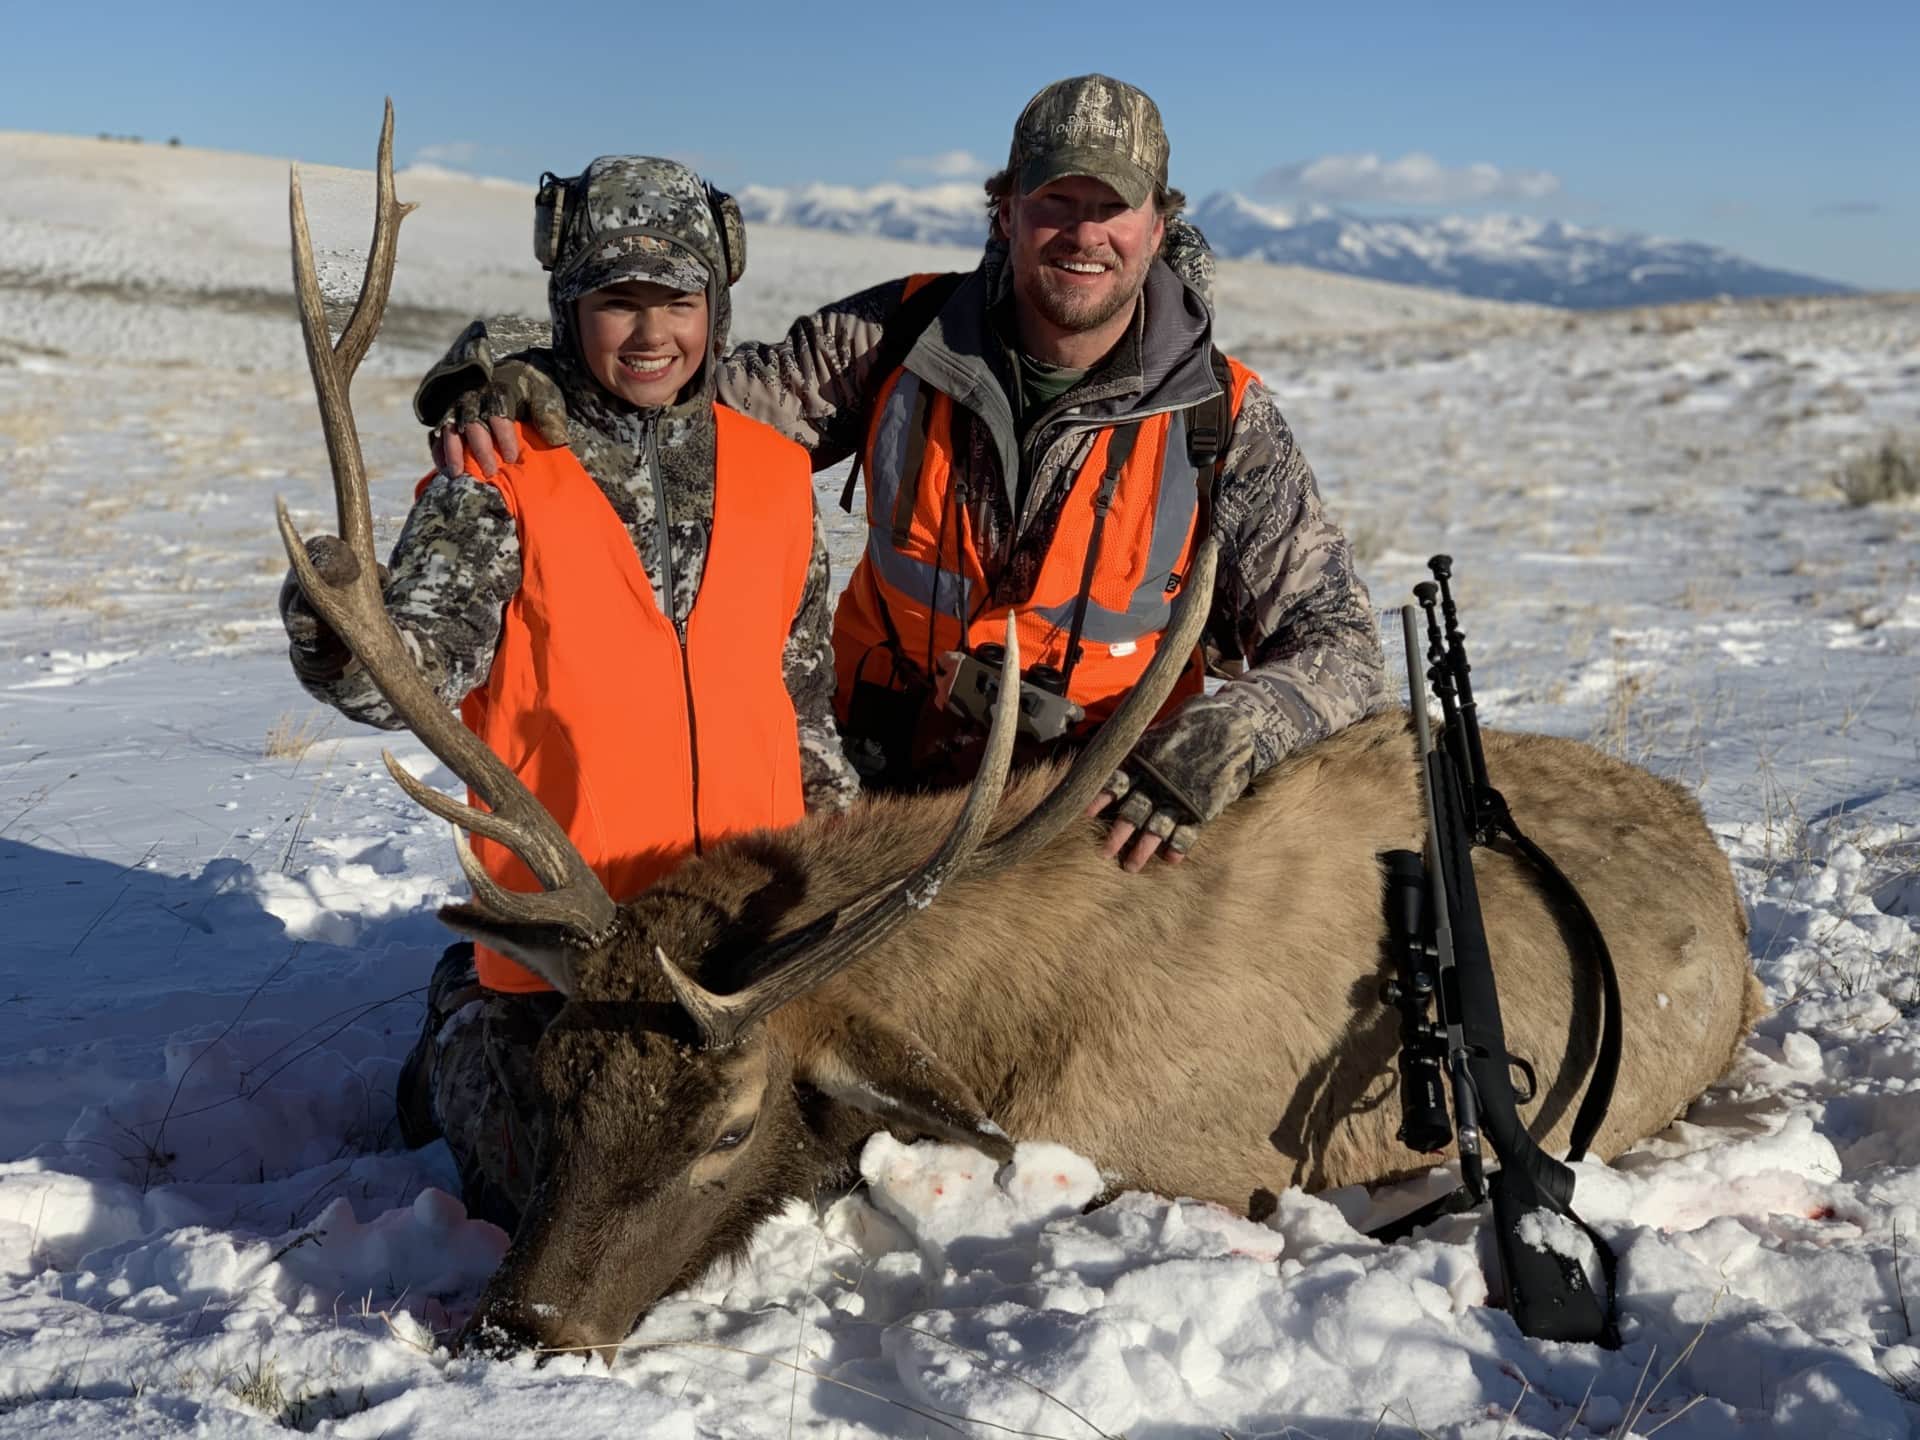 Branif Scott hunting with son